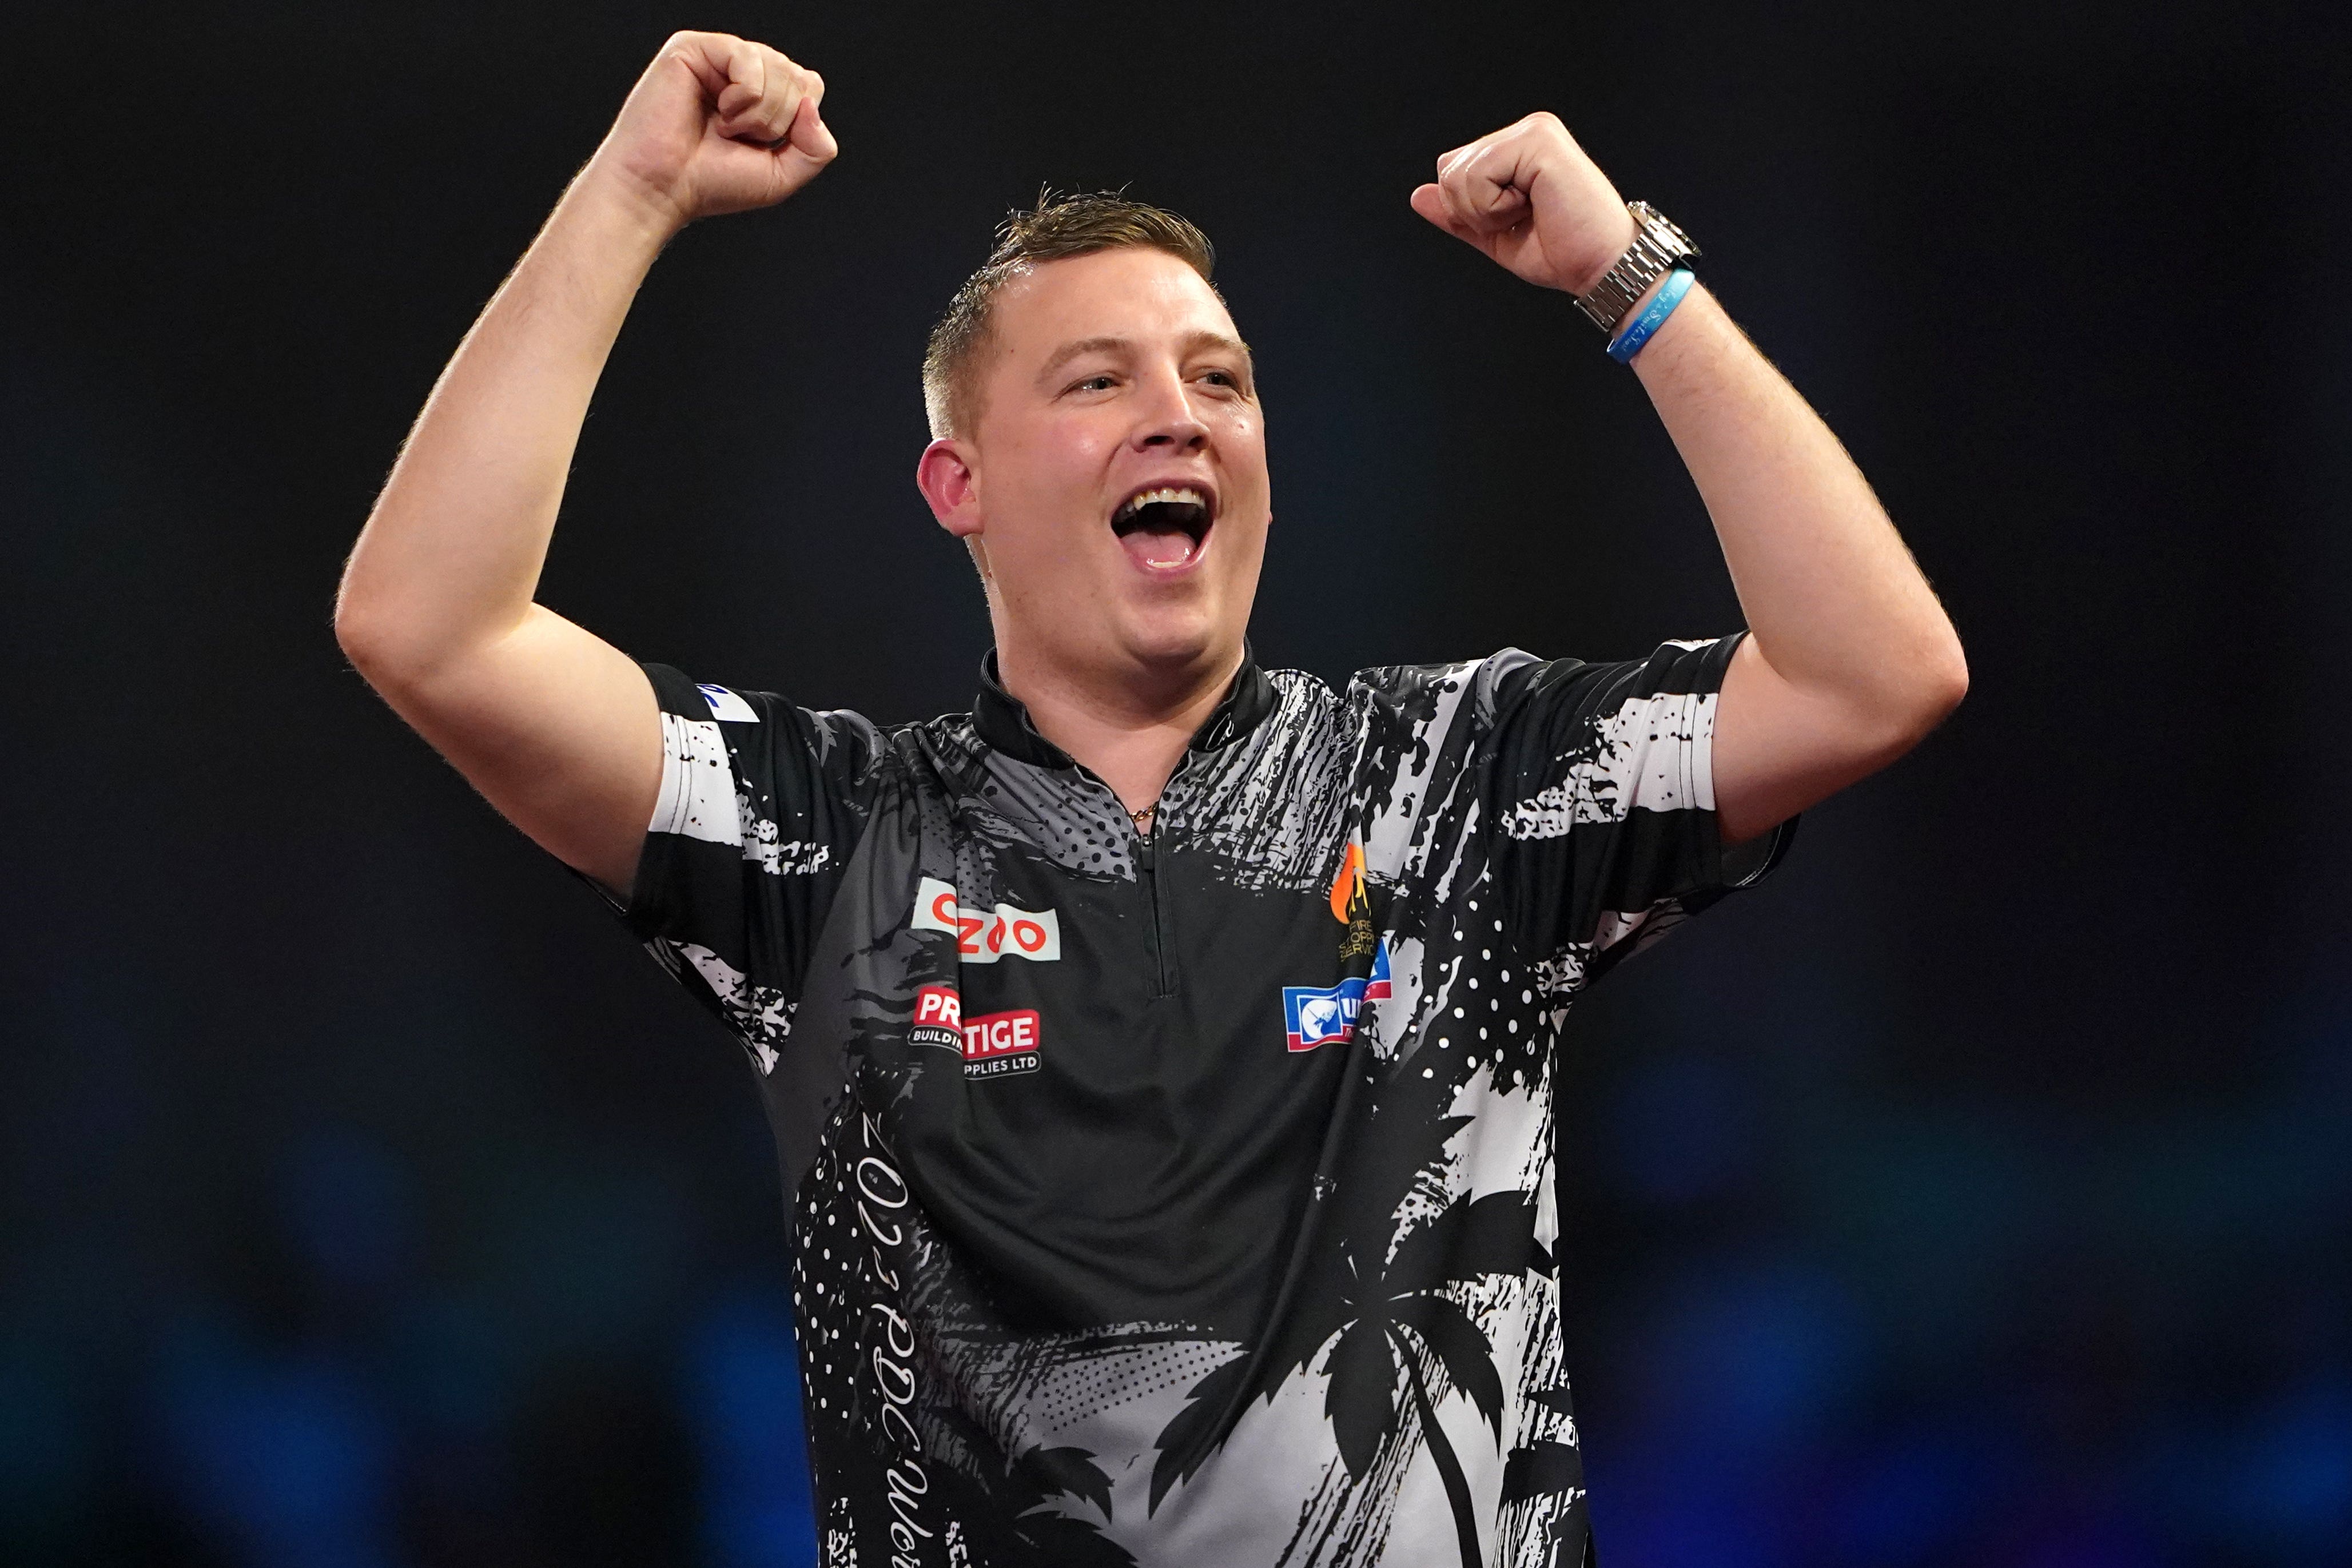 Chris Dobey has been awarded a Premier League place after winning the Masters this weekend